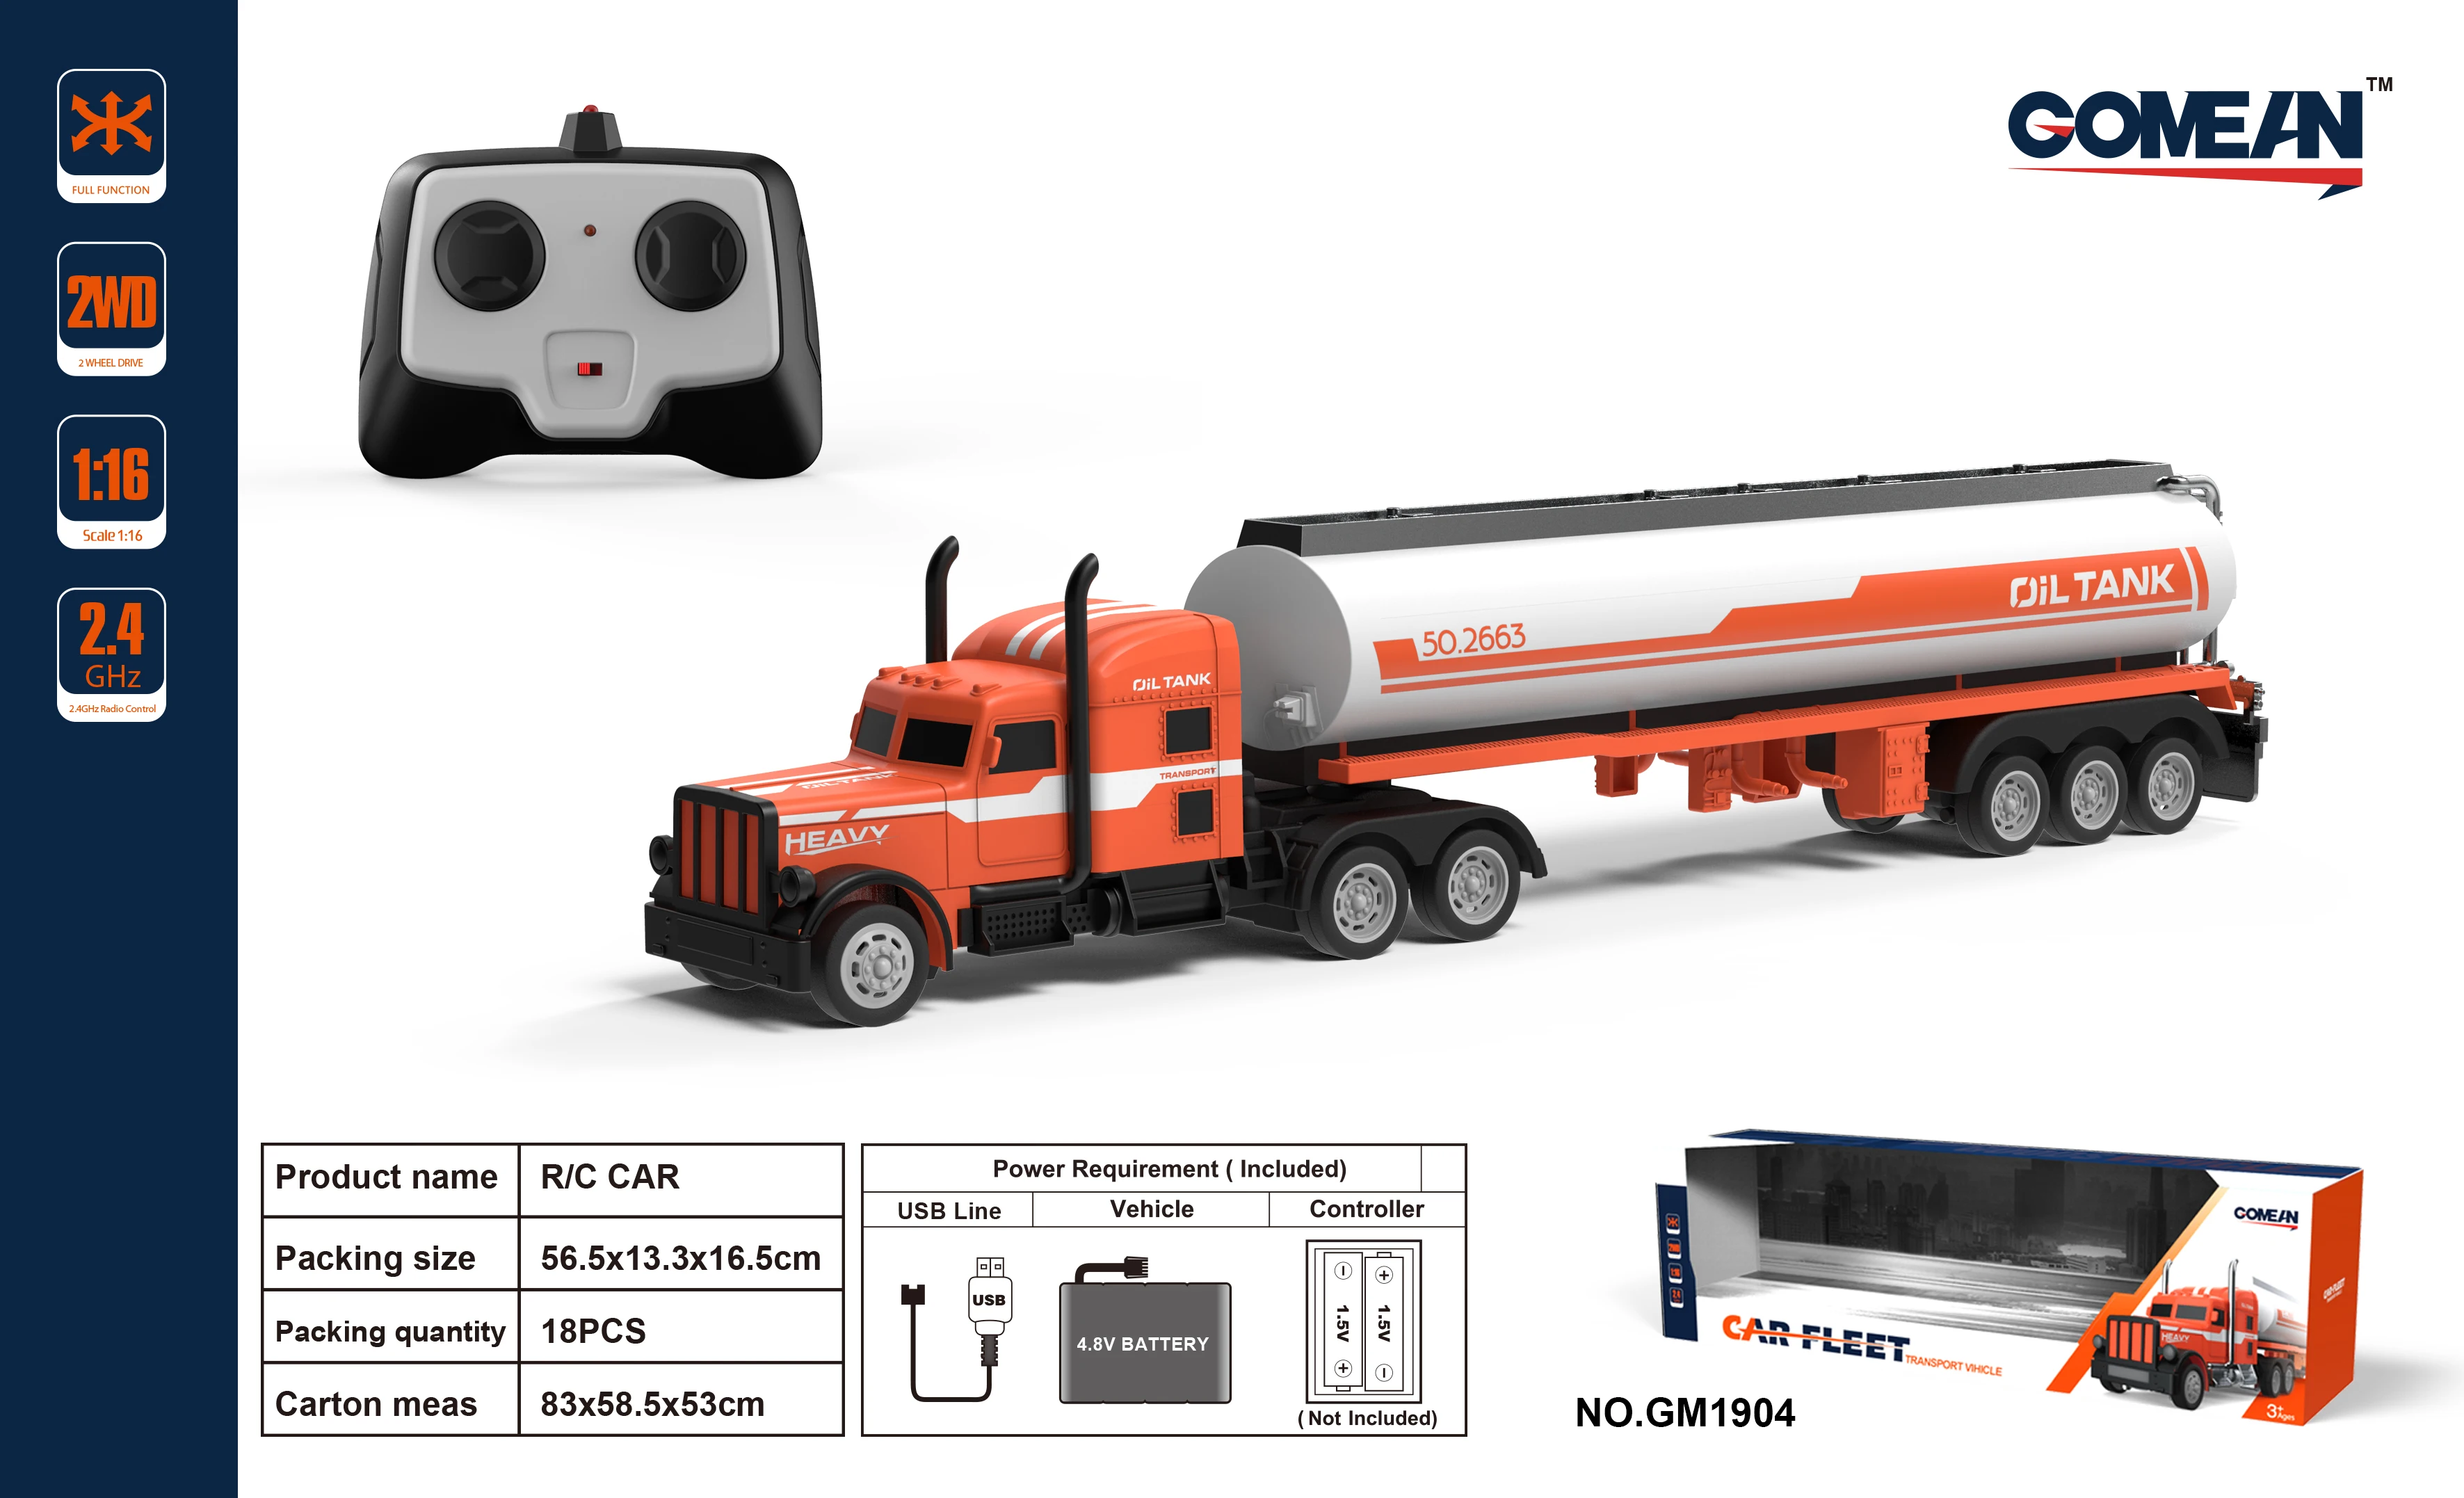 remote control truck with trailer